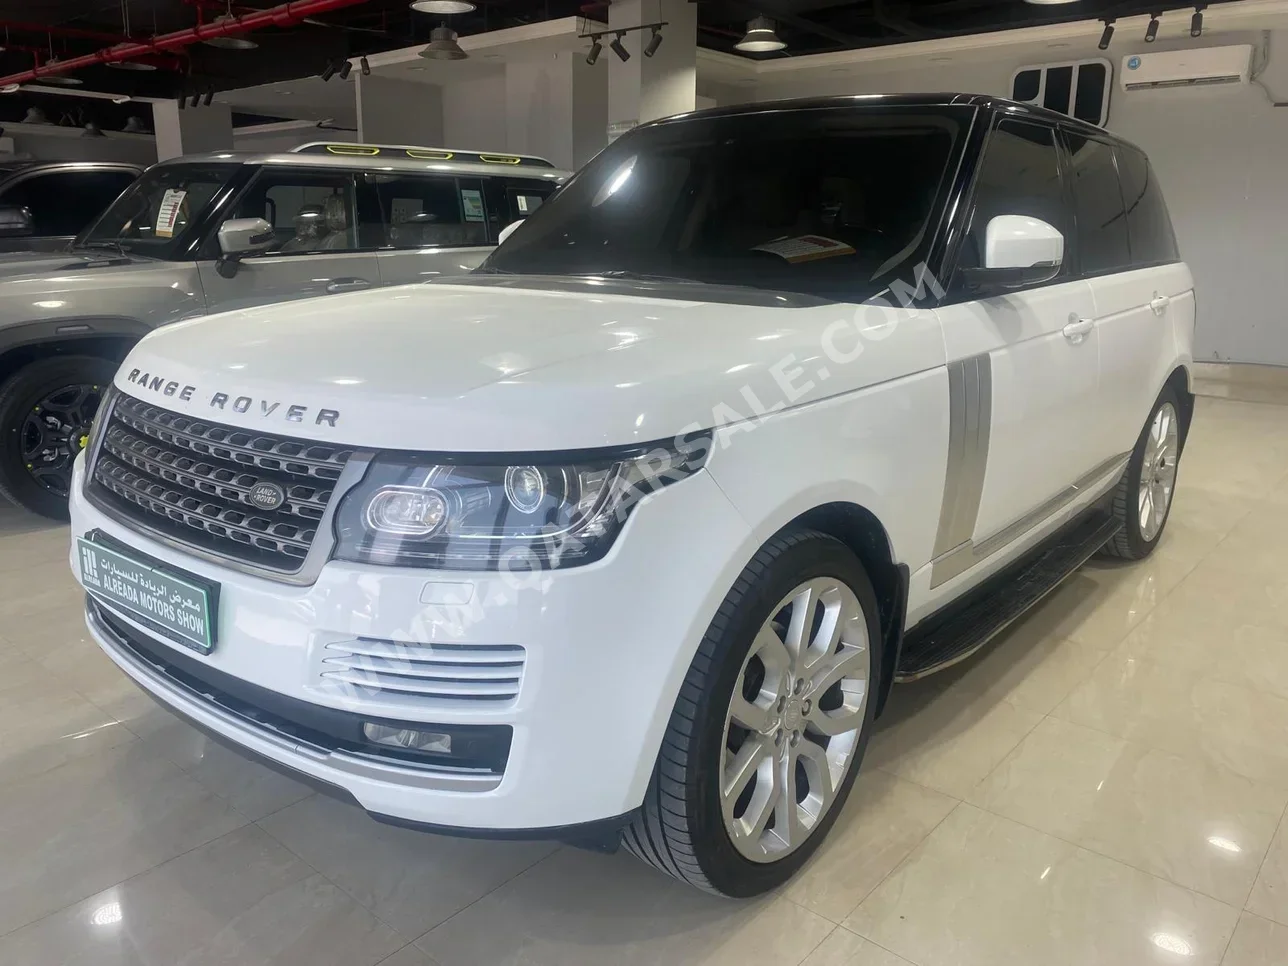 Land Rover  Range Rover  Vogue  2015  Automatic  265,000 Km  8 Cylinder  Four Wheel Drive (4WD)  SUV  White